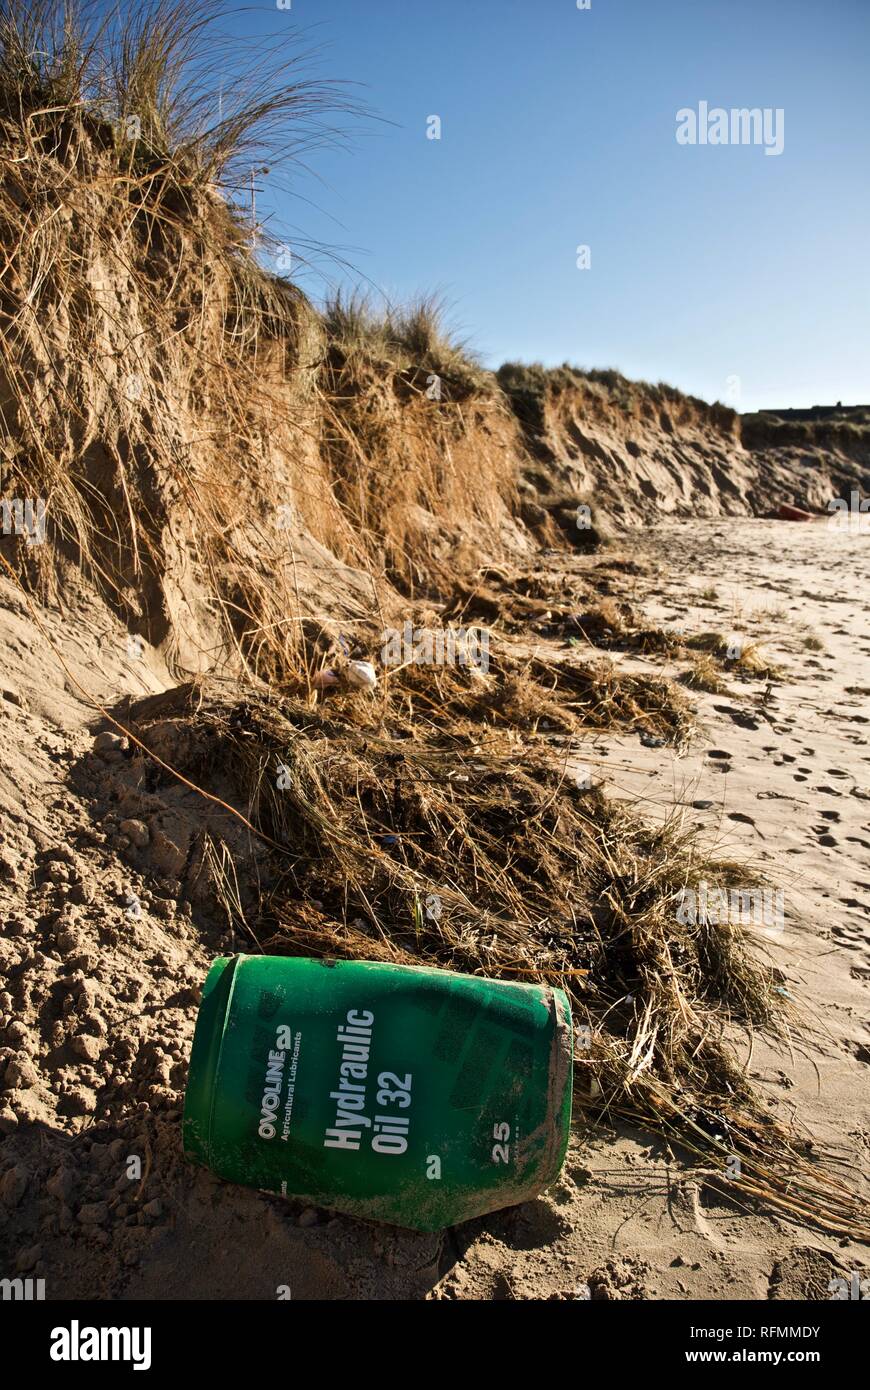 Plastic oil drum waste and pollution washed up on a beach in Rhosneigr, Anglesey, North Wales, UK Stock Photo